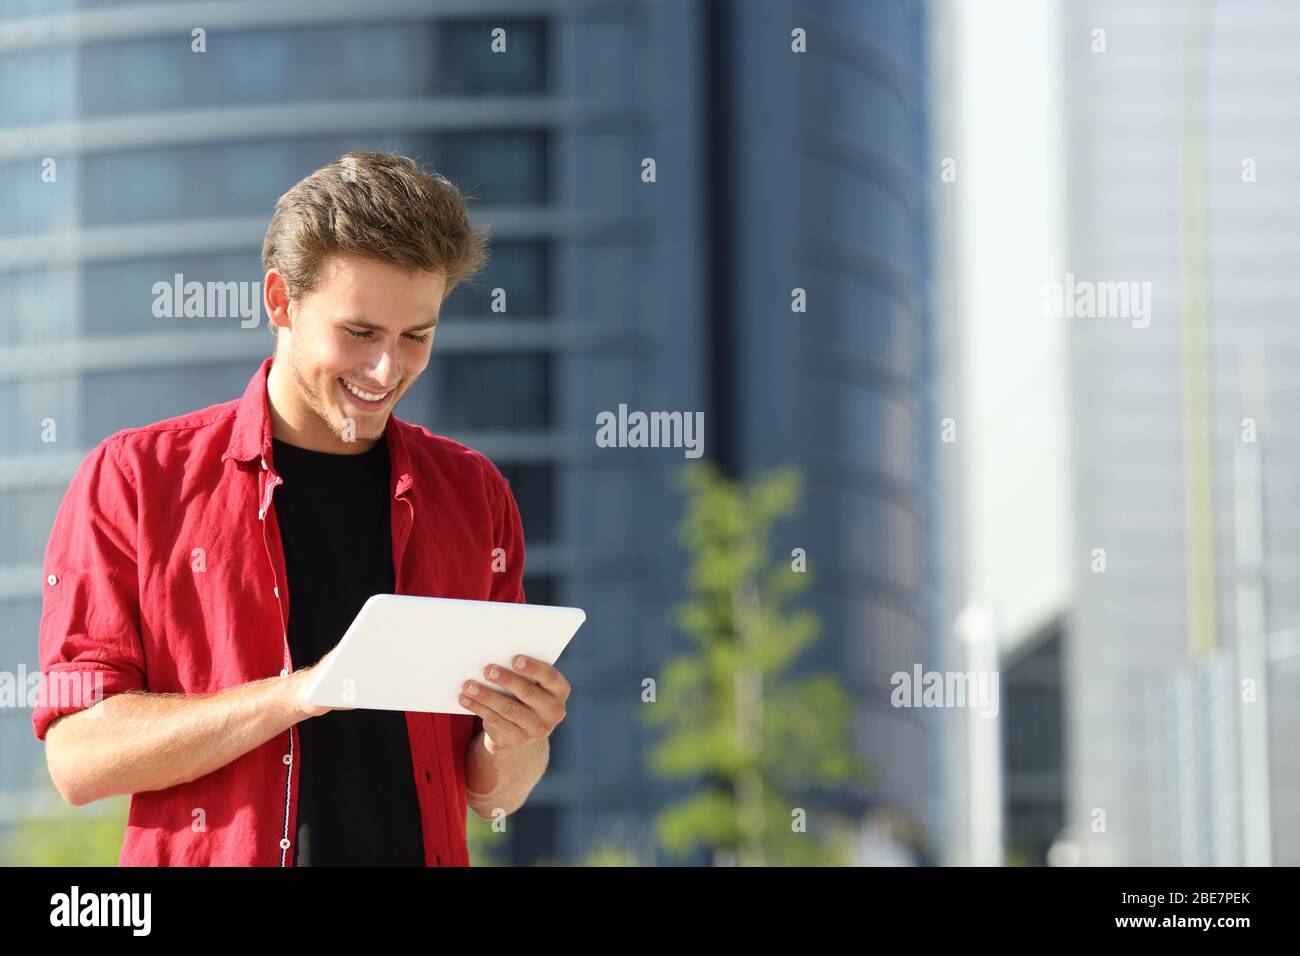 Happy man standing in the street using tablet in a city business area Stock Photo